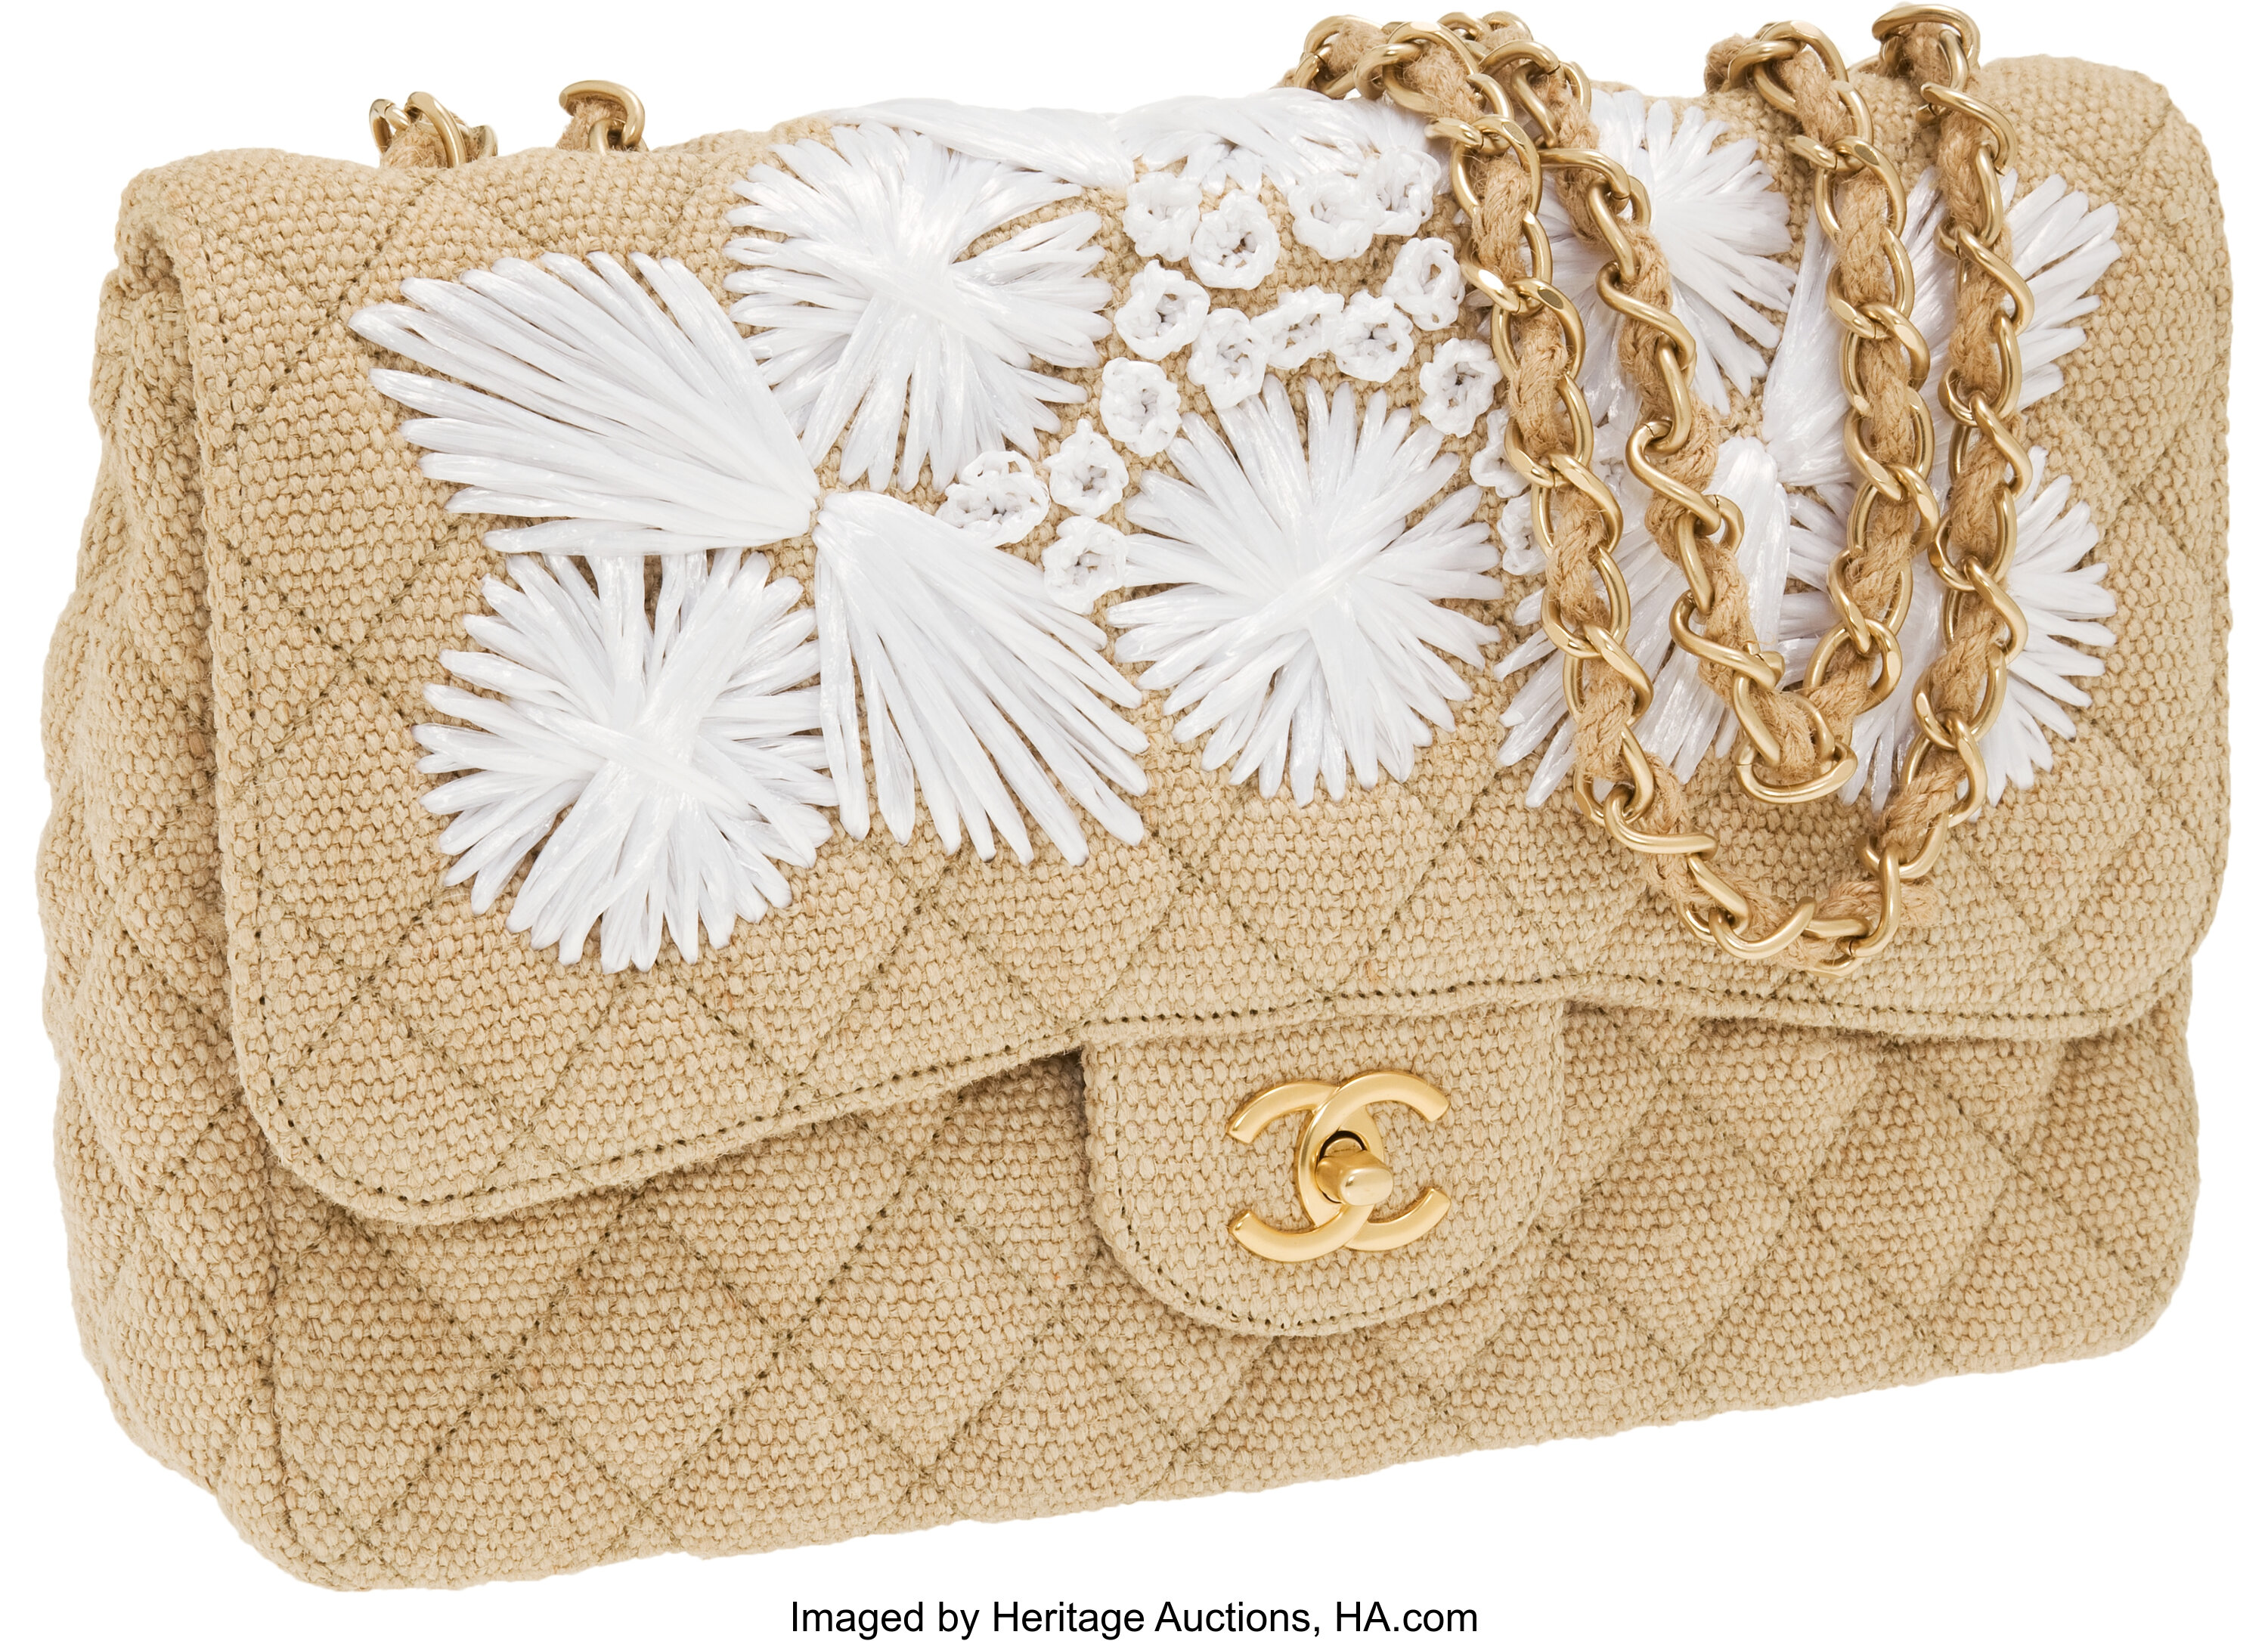 Chanel Limited Edition Rope Woven Flap Bag